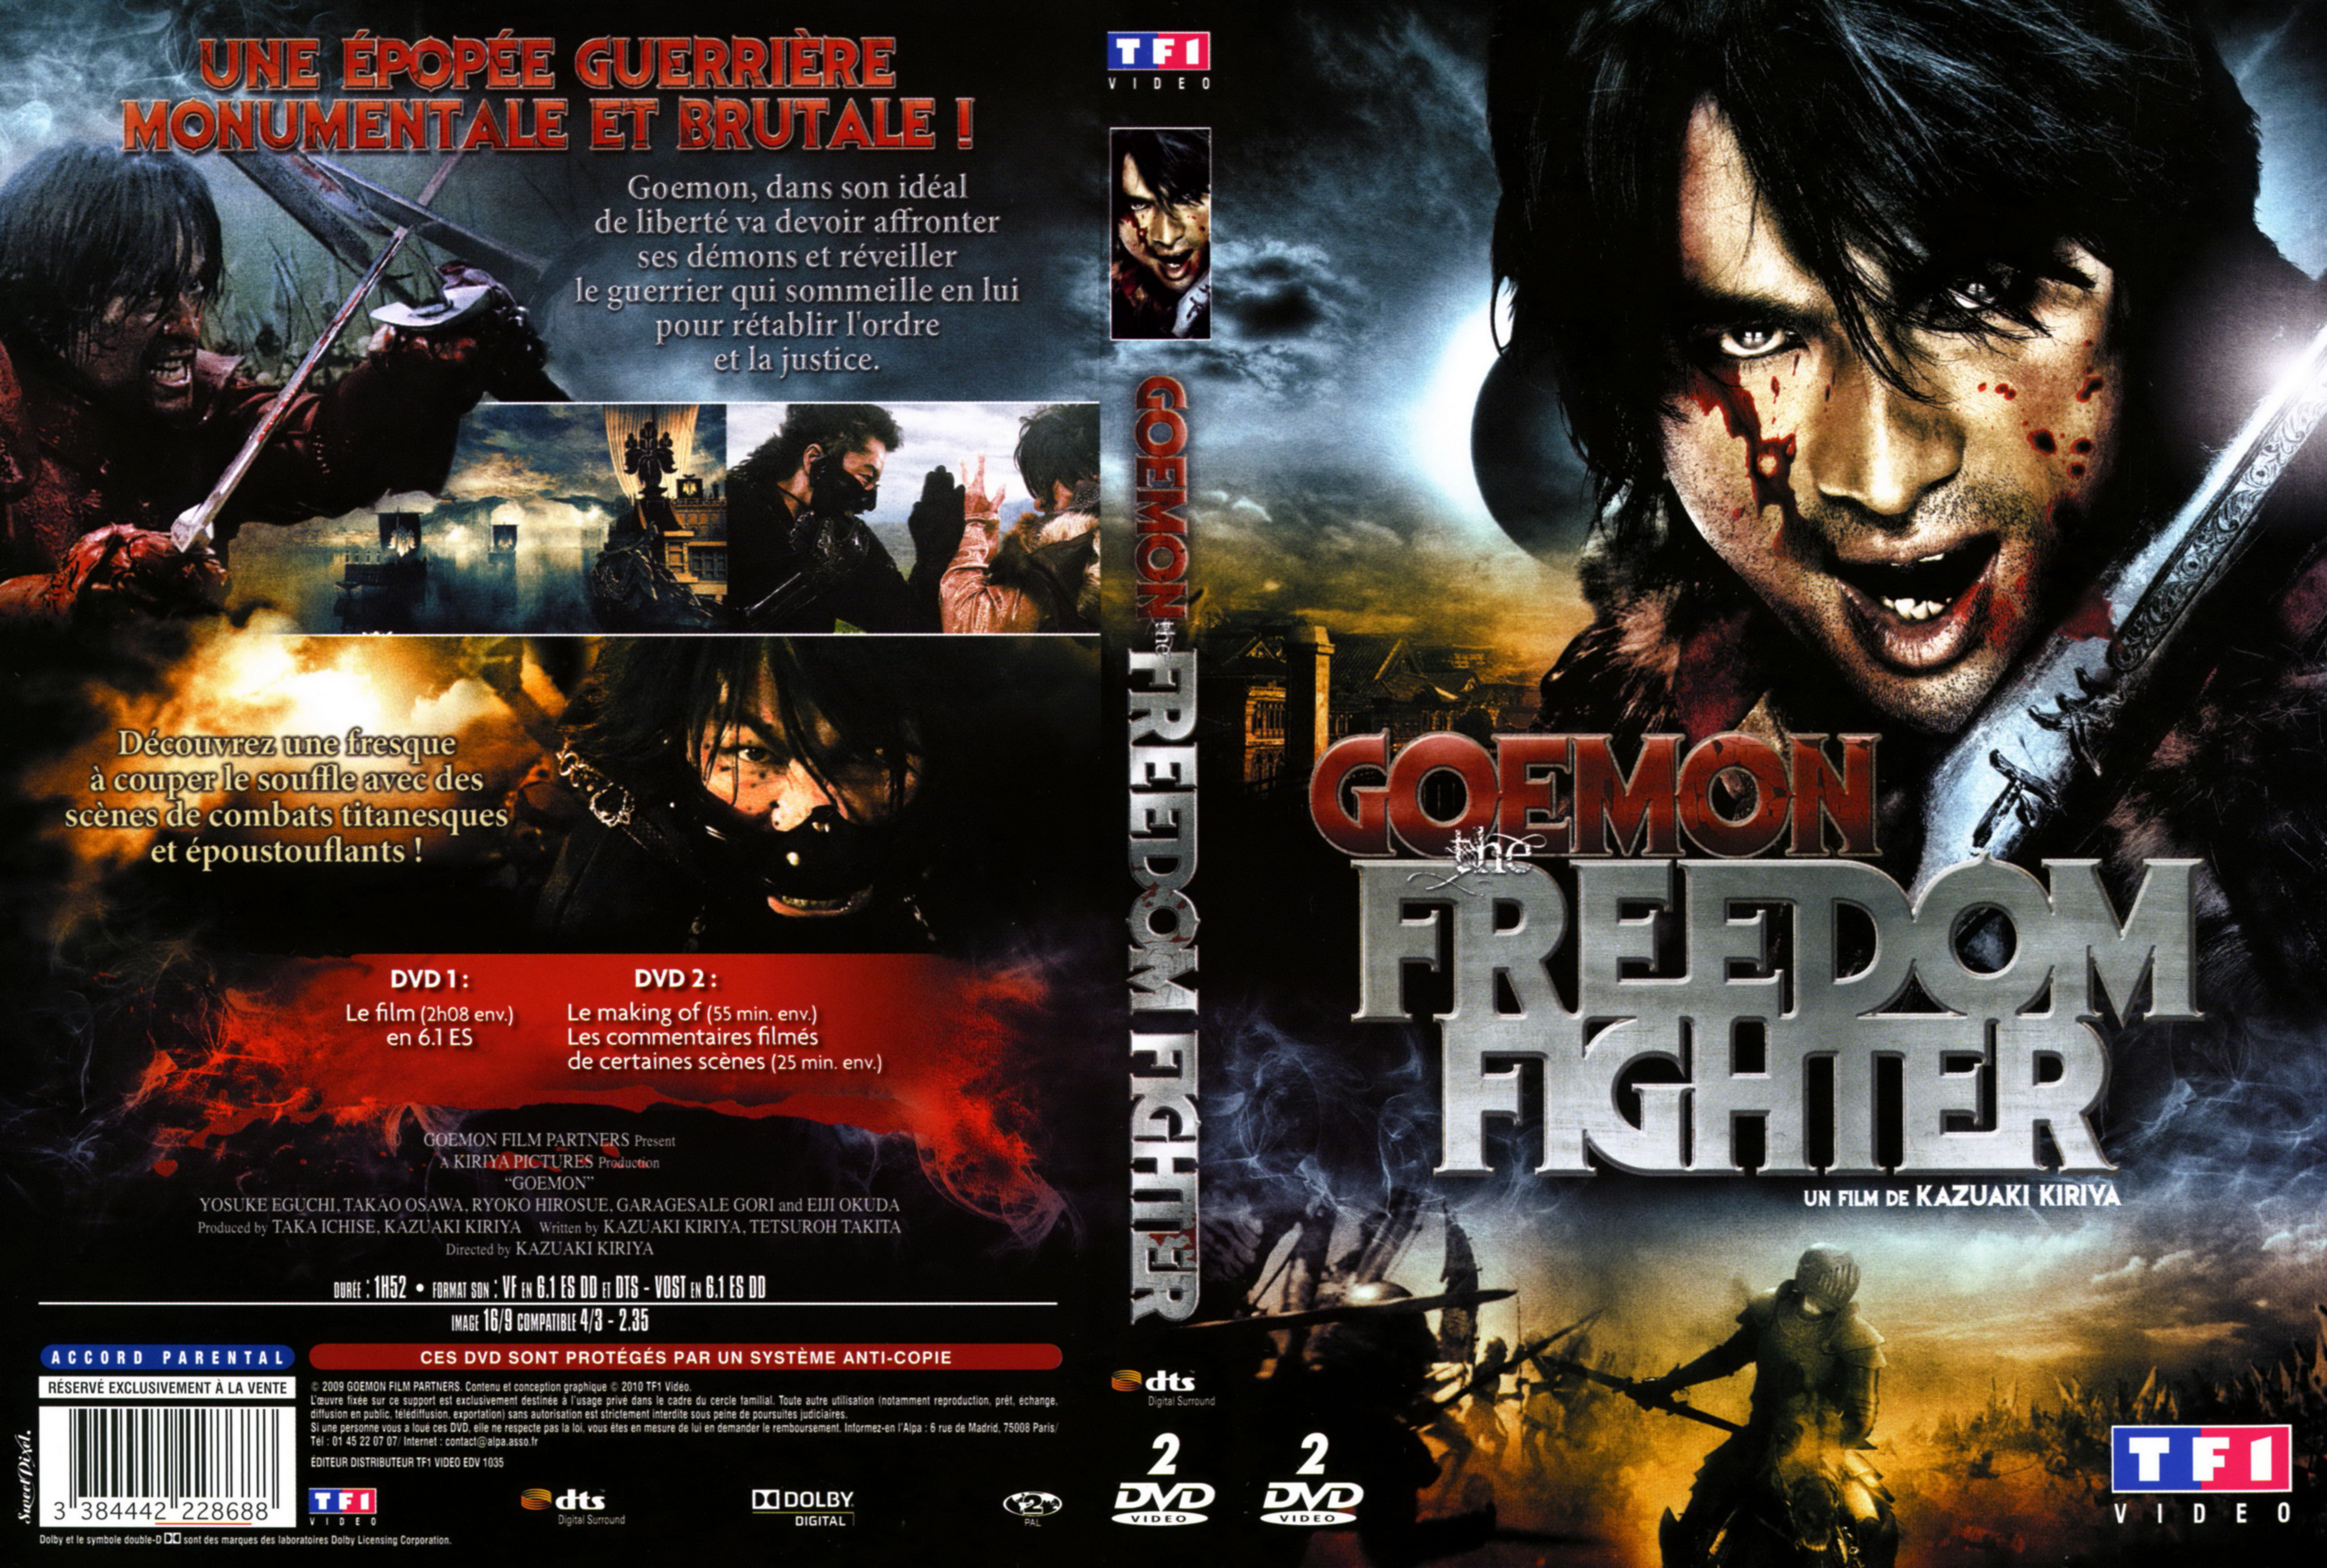 Jaquette DVD Goemon the freedom fighter